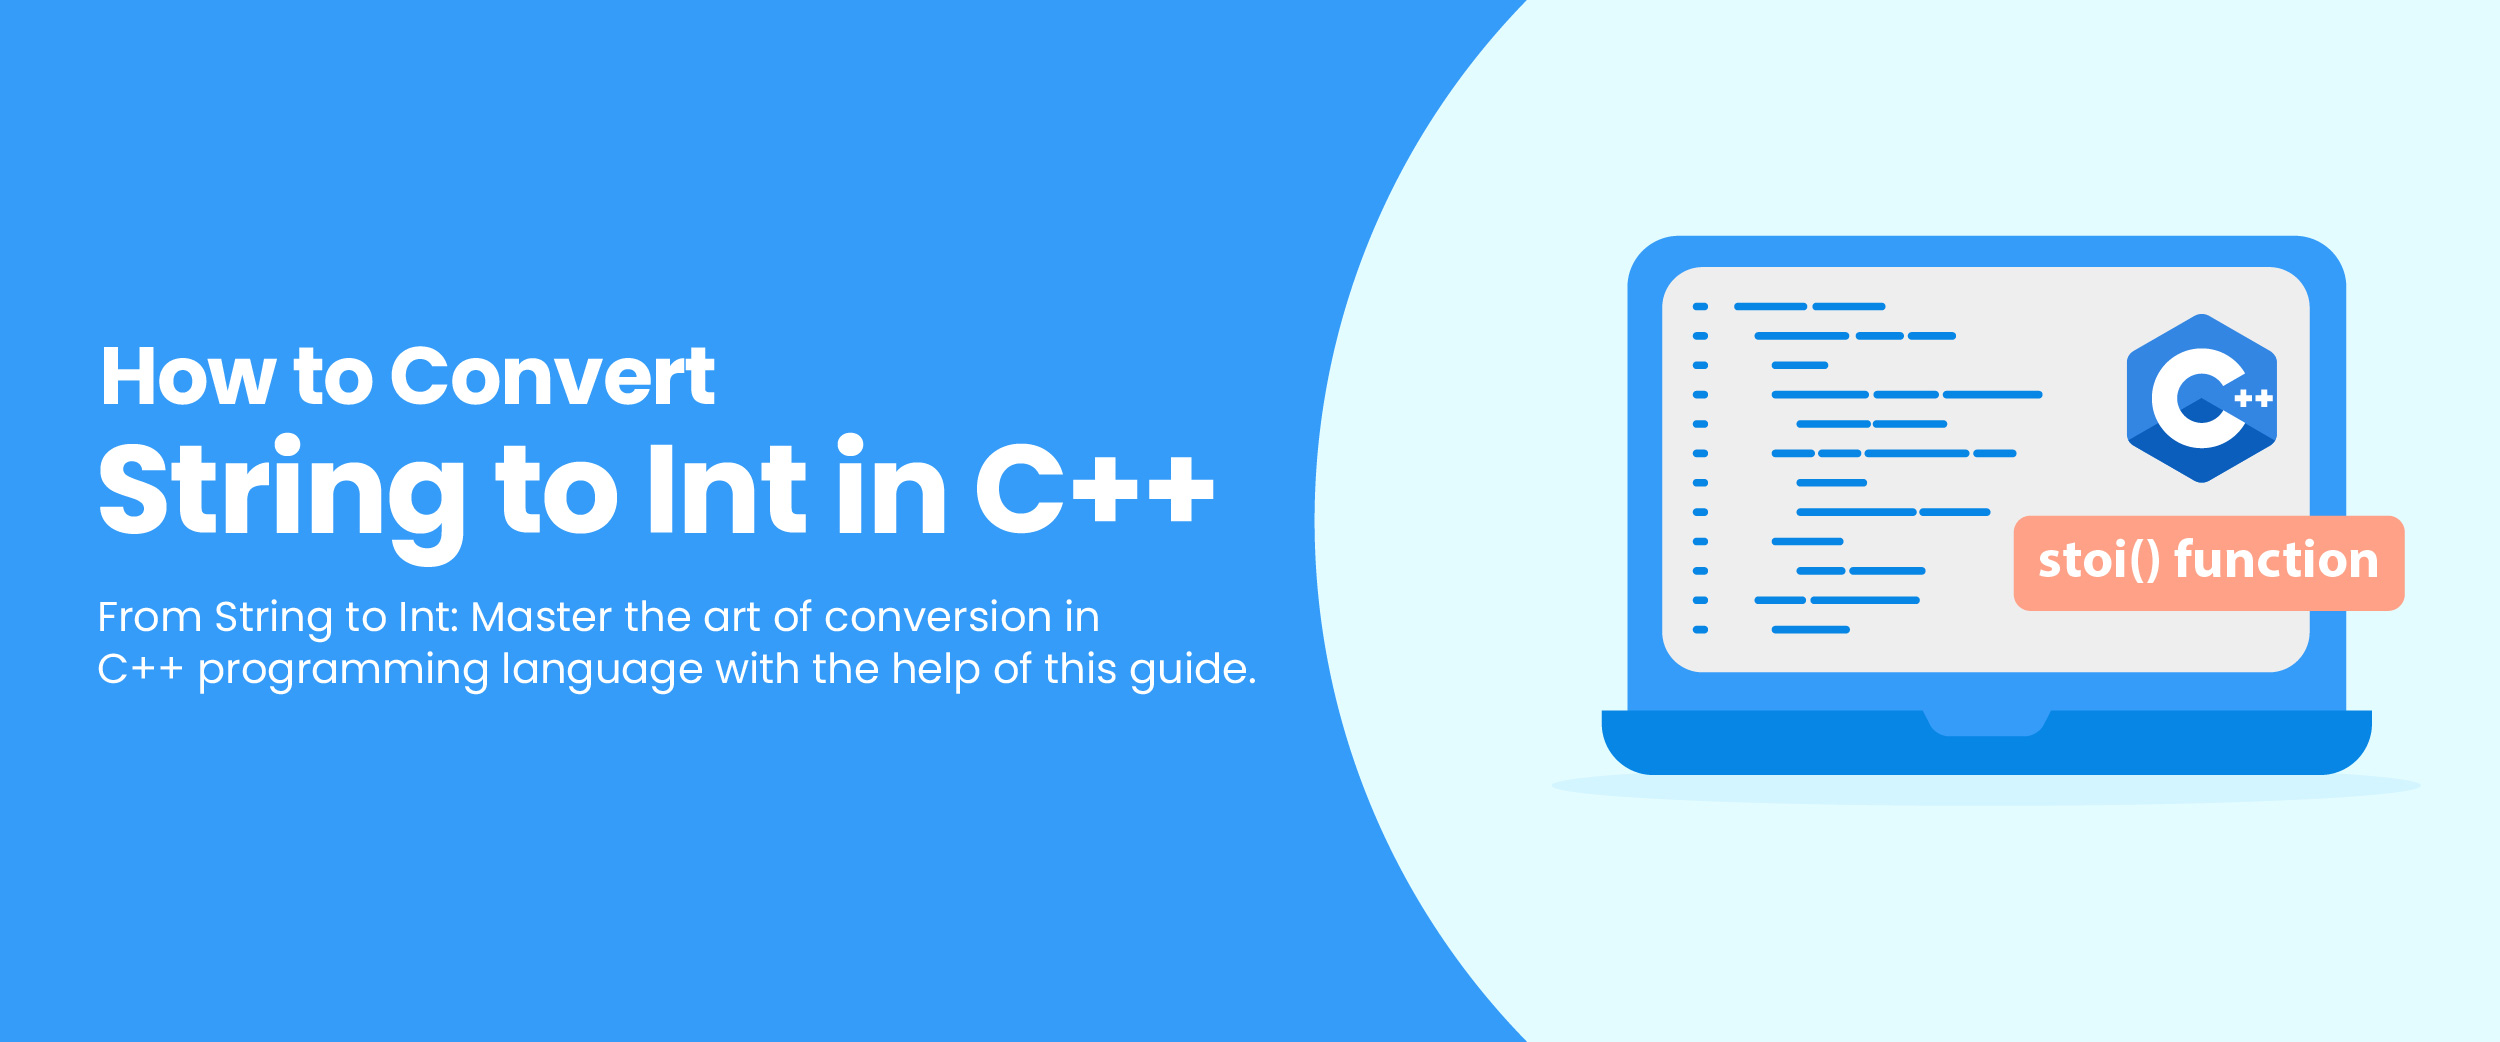 How to convert a string to int in C++